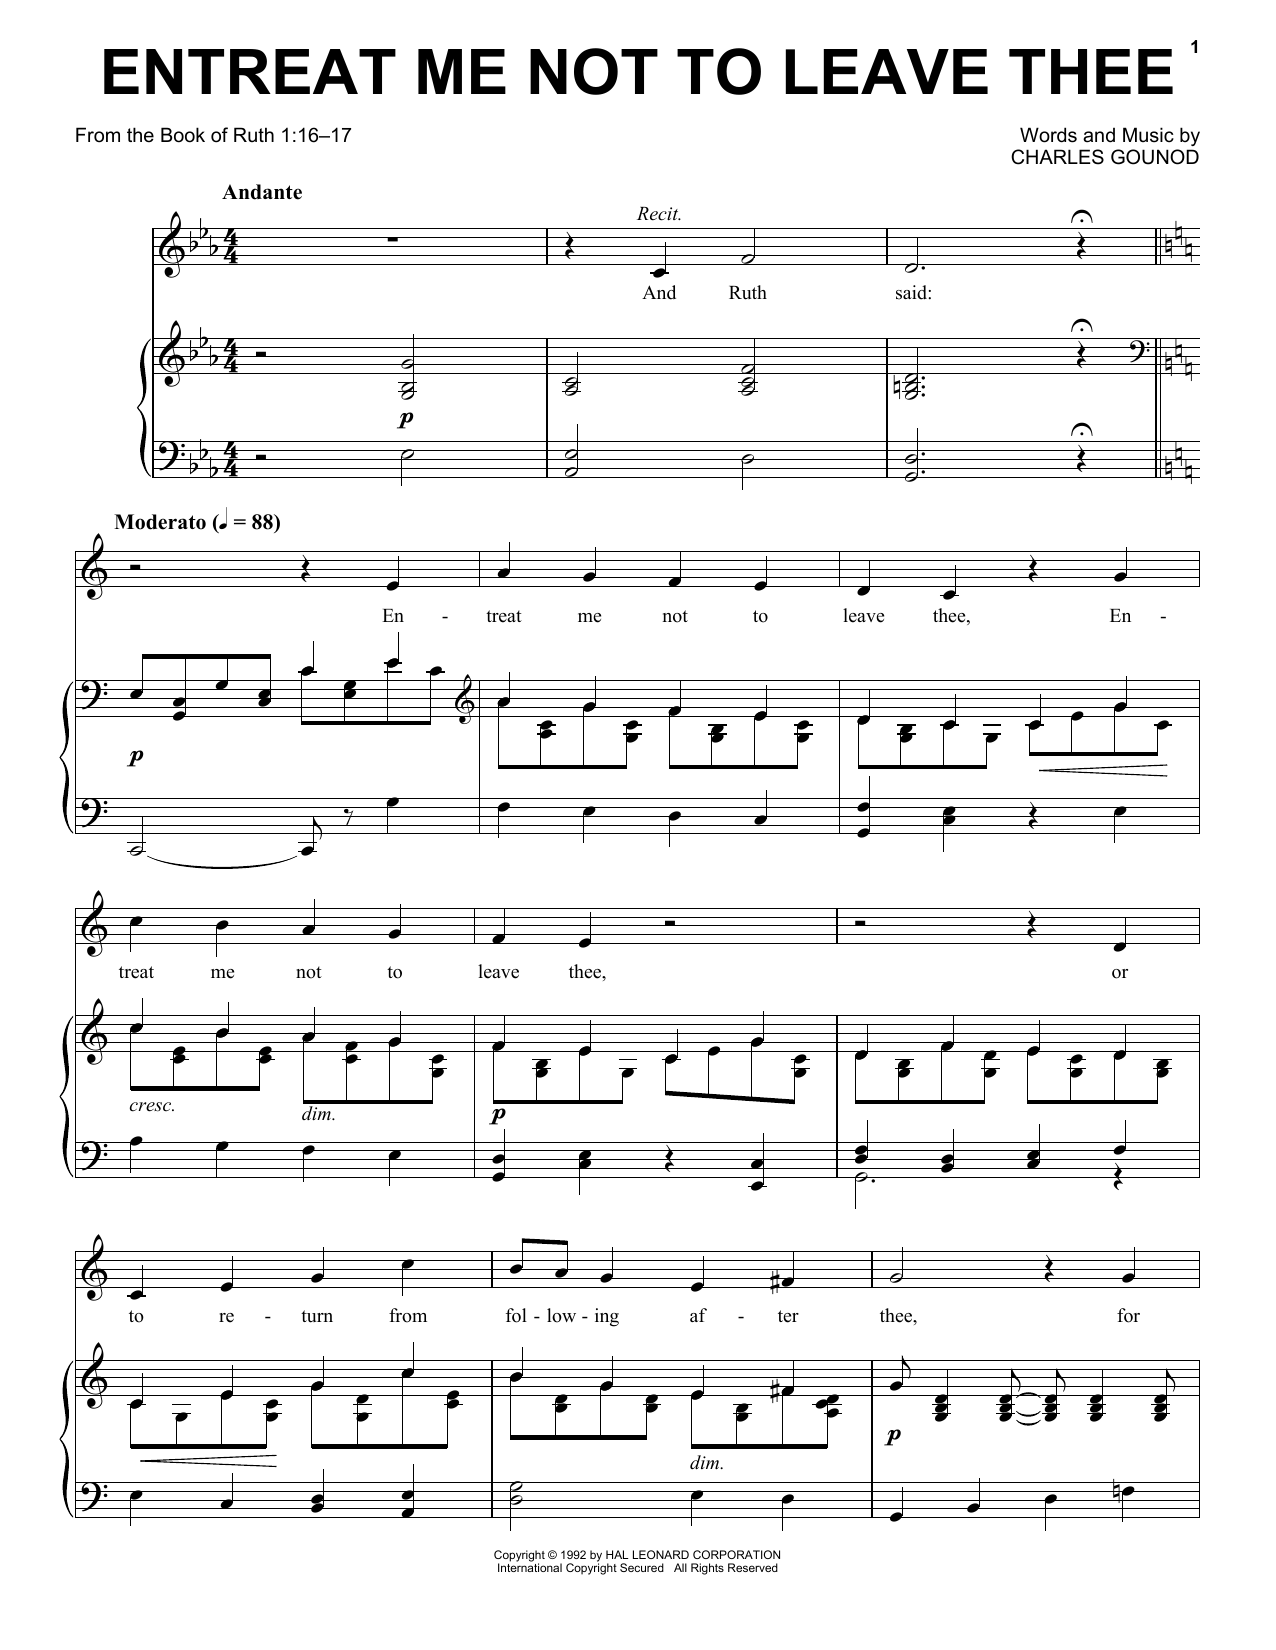 Charles Gounod Entreat Me Not To Leave Thee sheet music notes printable PDF score